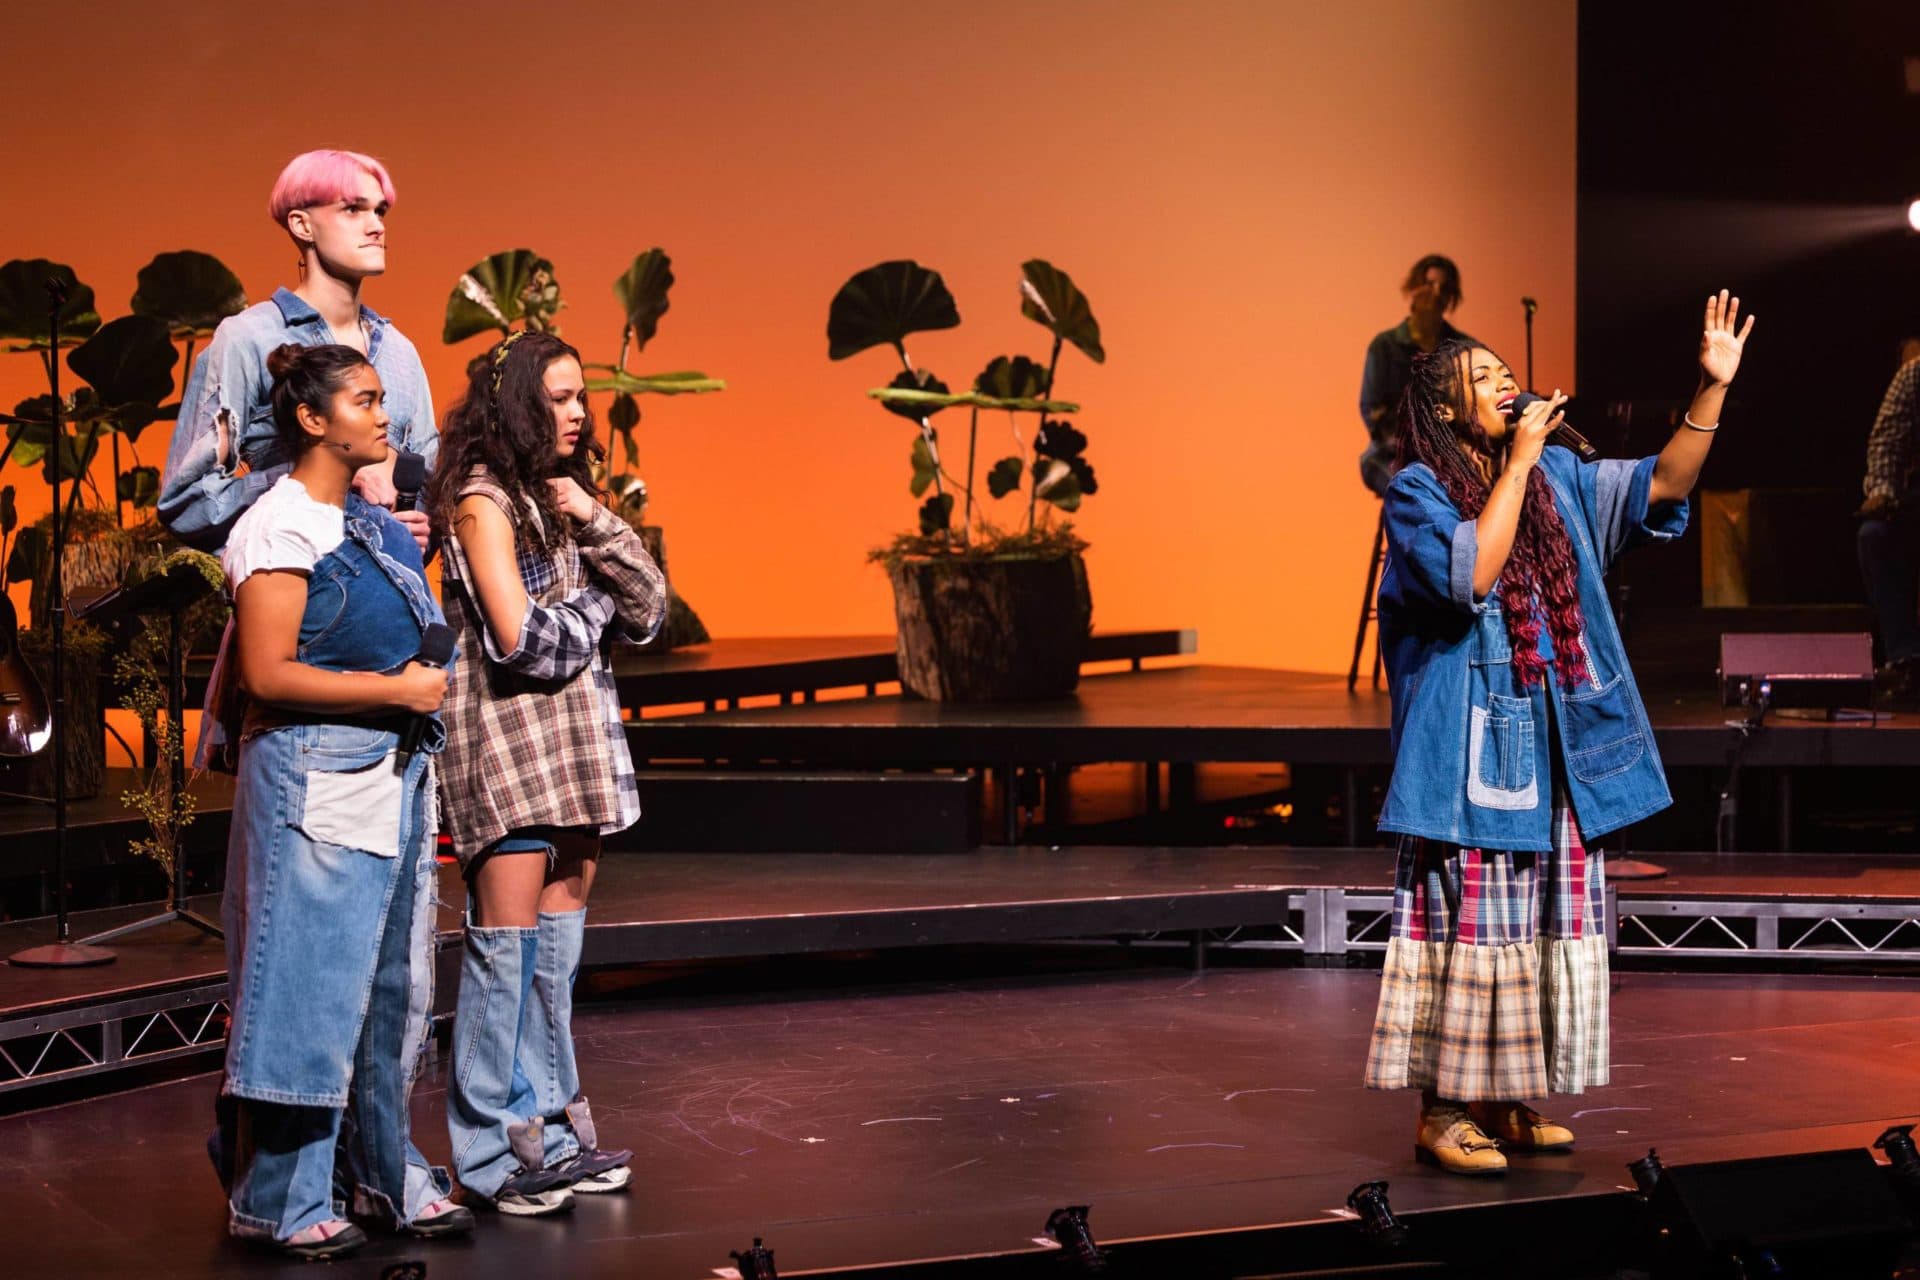 Left to right, Paravi Das as Forte, Luke Ferrari as Possible, YDE as Sophia and Brittany Campbell as Oak in A.R.T.'s &quot;WILD: A Musical Becoming.&quot; (Courtesy Maggie Hall/Nile Scott Studios)